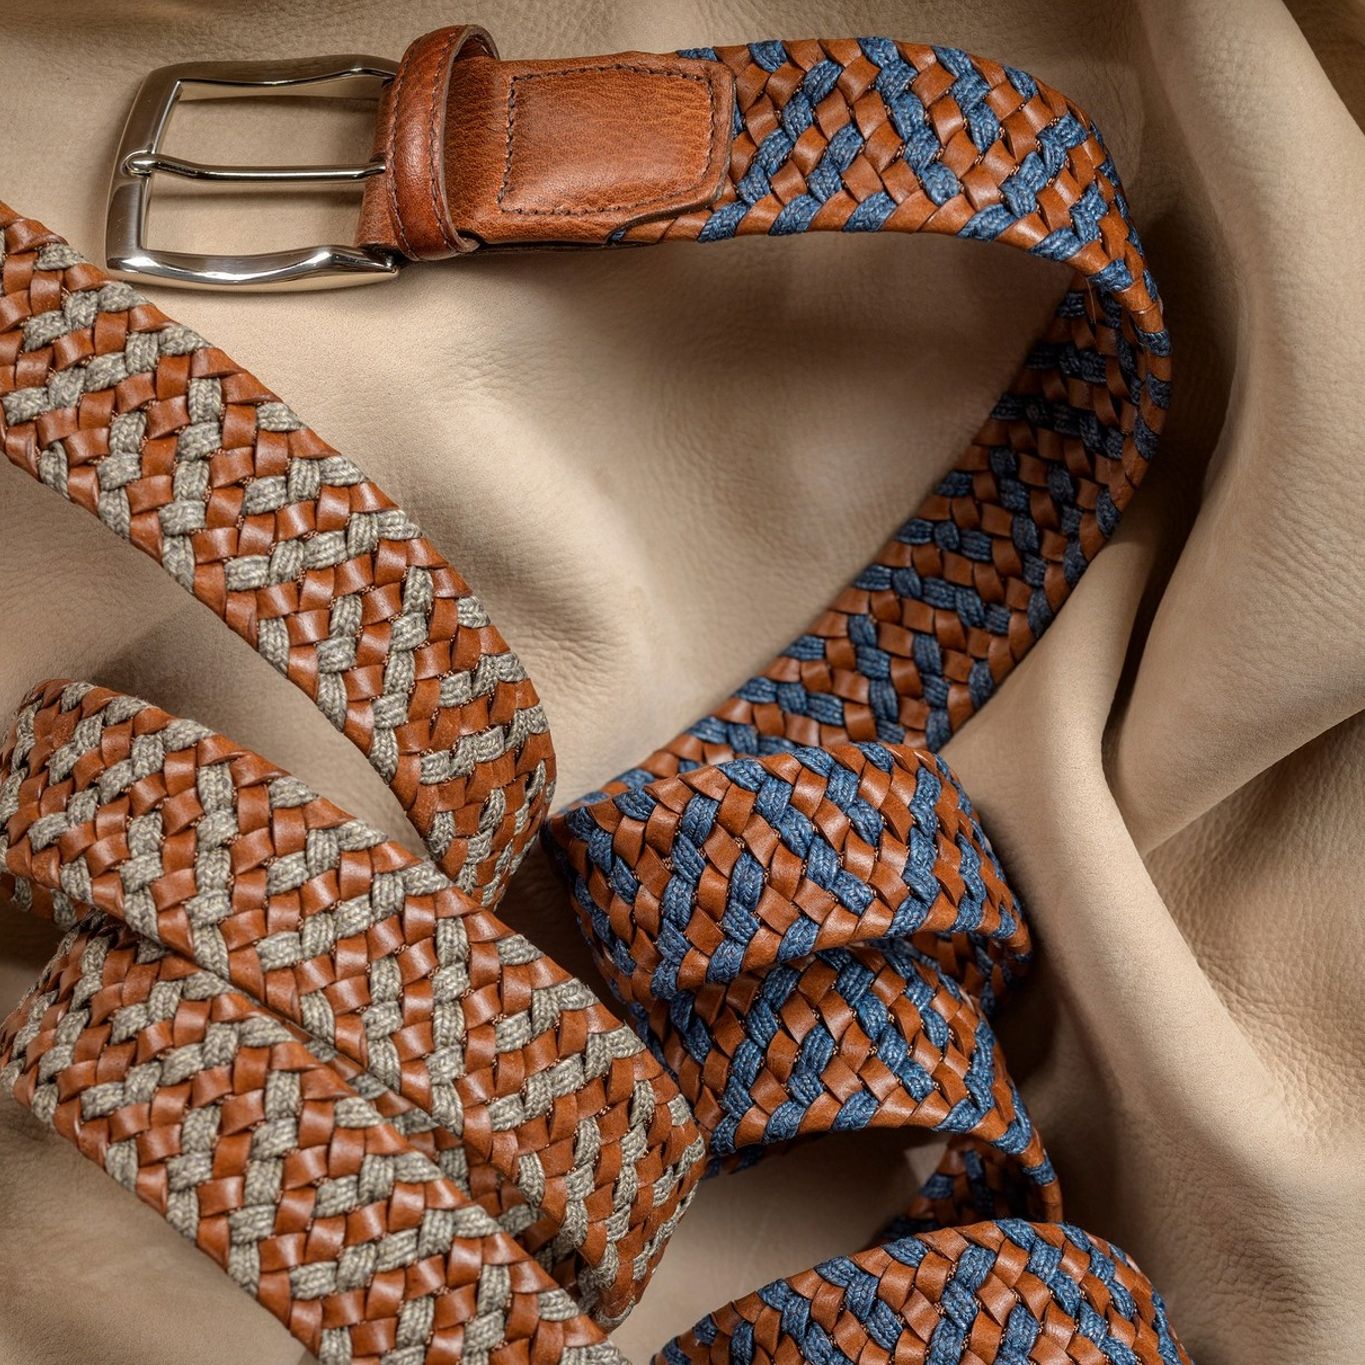 Braided Italian Leather and Linen Belt in Cognac and Navy by Torino Le